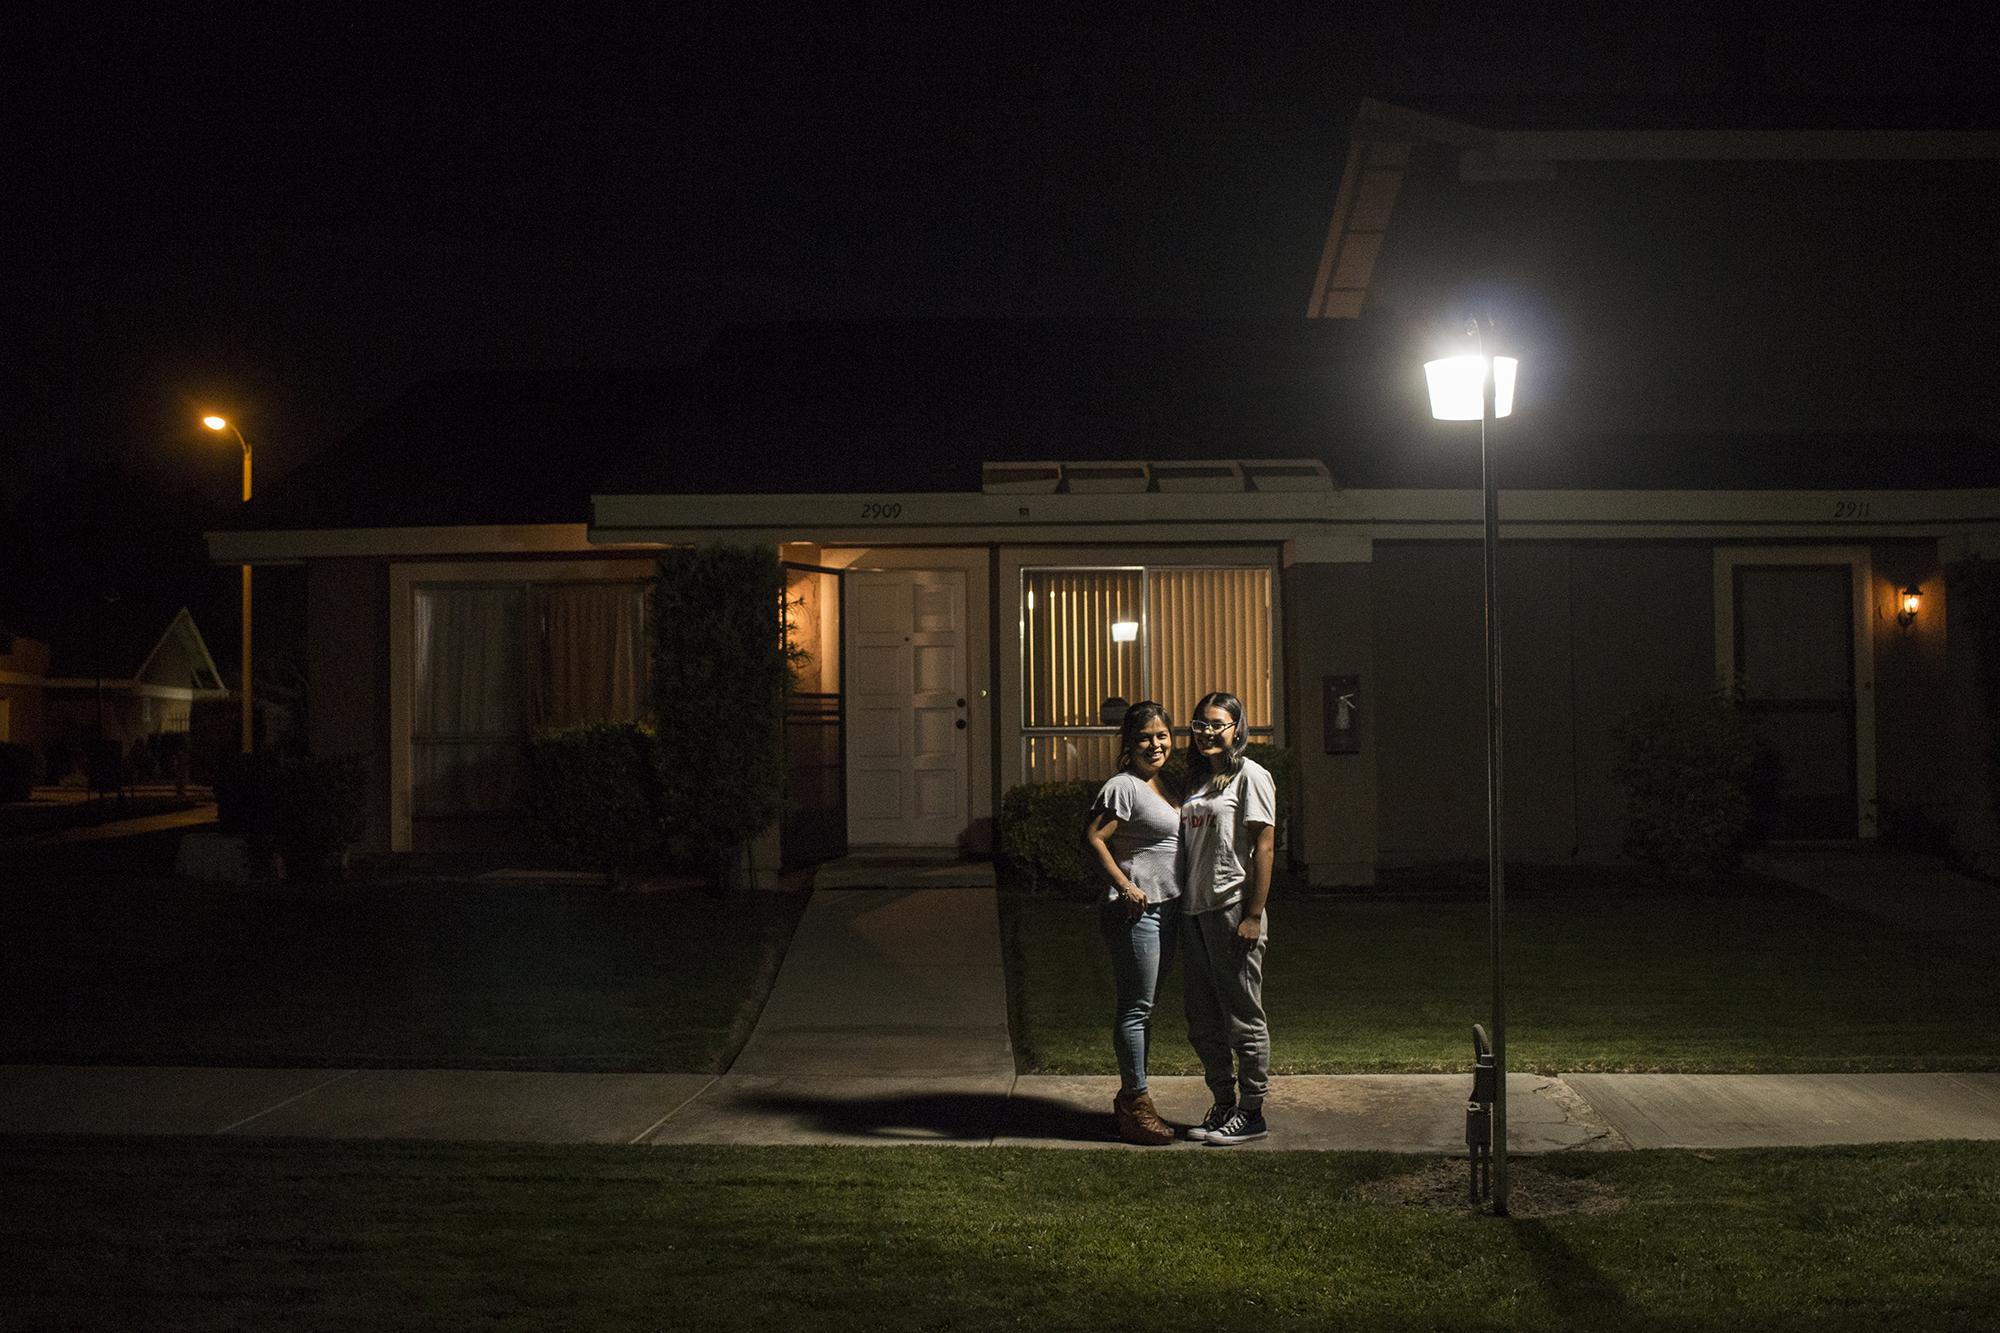 Desireé Ramírez, 47, with her daughter Gisselle Calvillo, 17, at their home in Lancaster, California. Desirée migrated in the 80s at just 6 years old. She crossed the border undocumented with her mother and grew up in Los Angeles. Now she manages a school. Her son Erick, born in the United States, plays for La Selecta. “I'm conscious of my position in this country relative to other migrants. My children aren't Mexican or Salvadoran. They're American children of a Mexican father and Salvadoran mother,” she says.